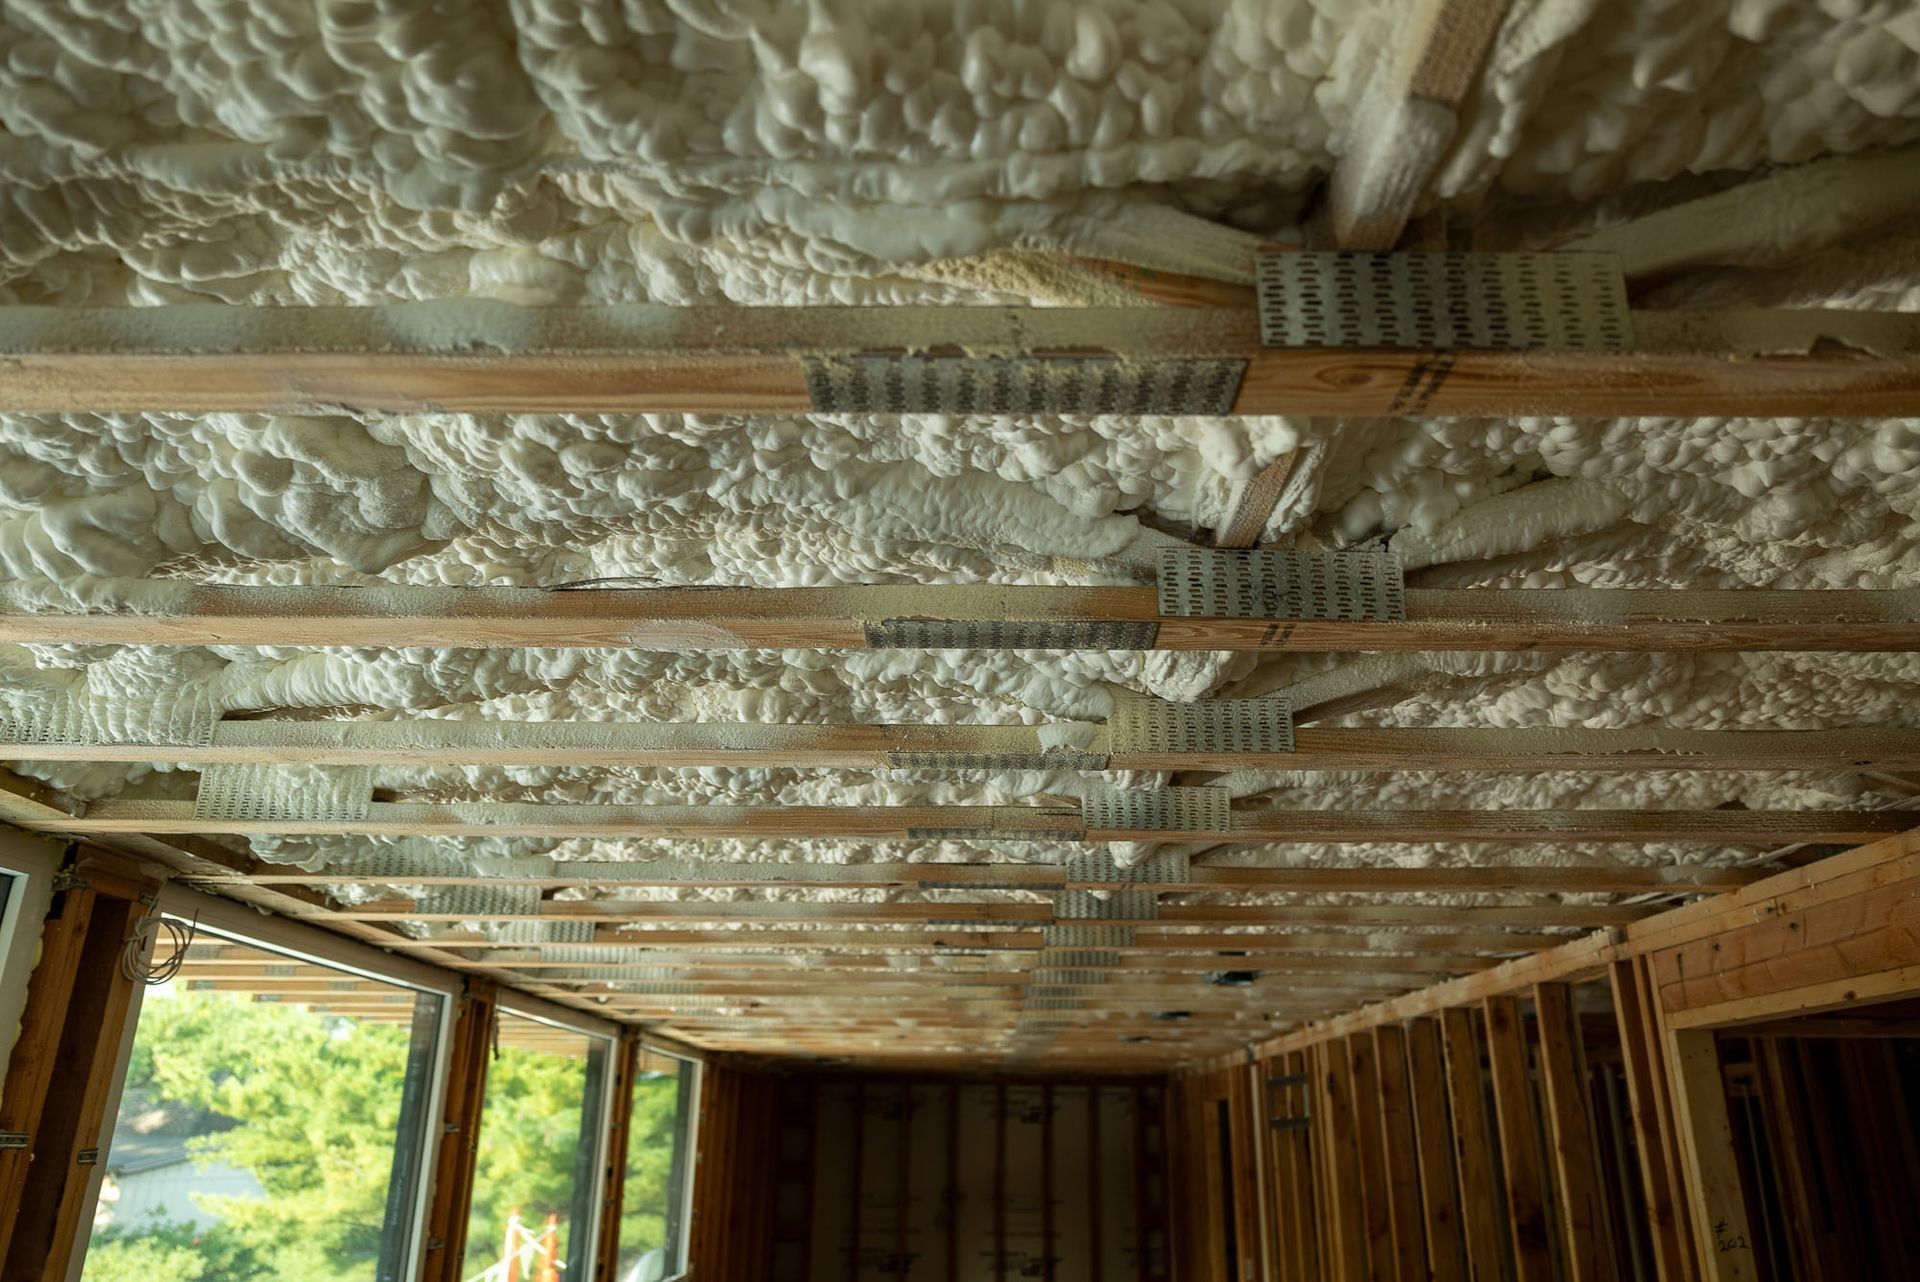 Blown in insulation shown from above throughout open web trusses